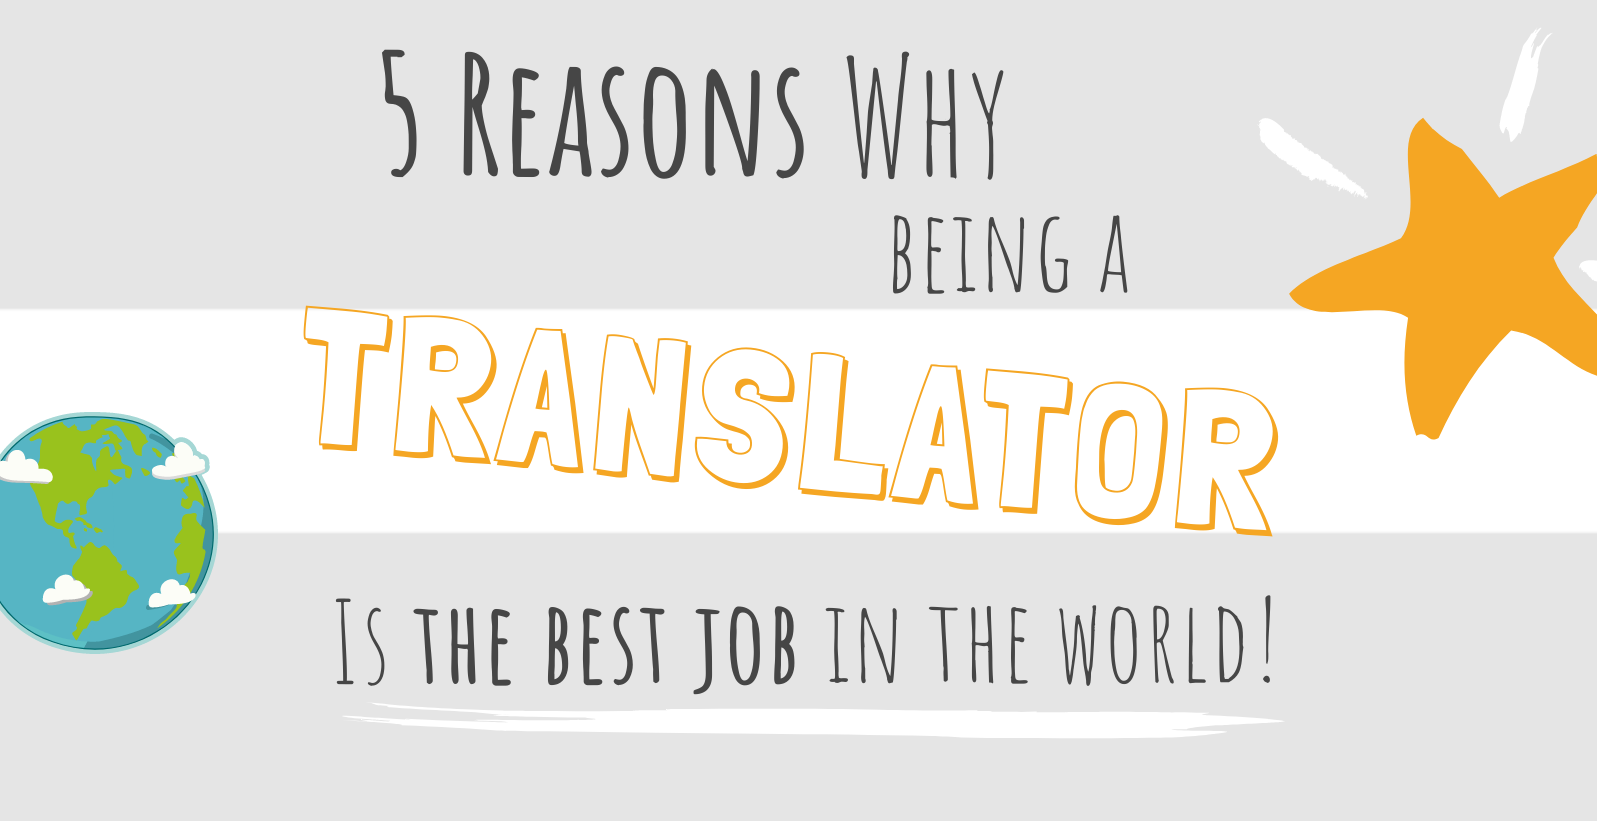 5 reasons why being a translator is great